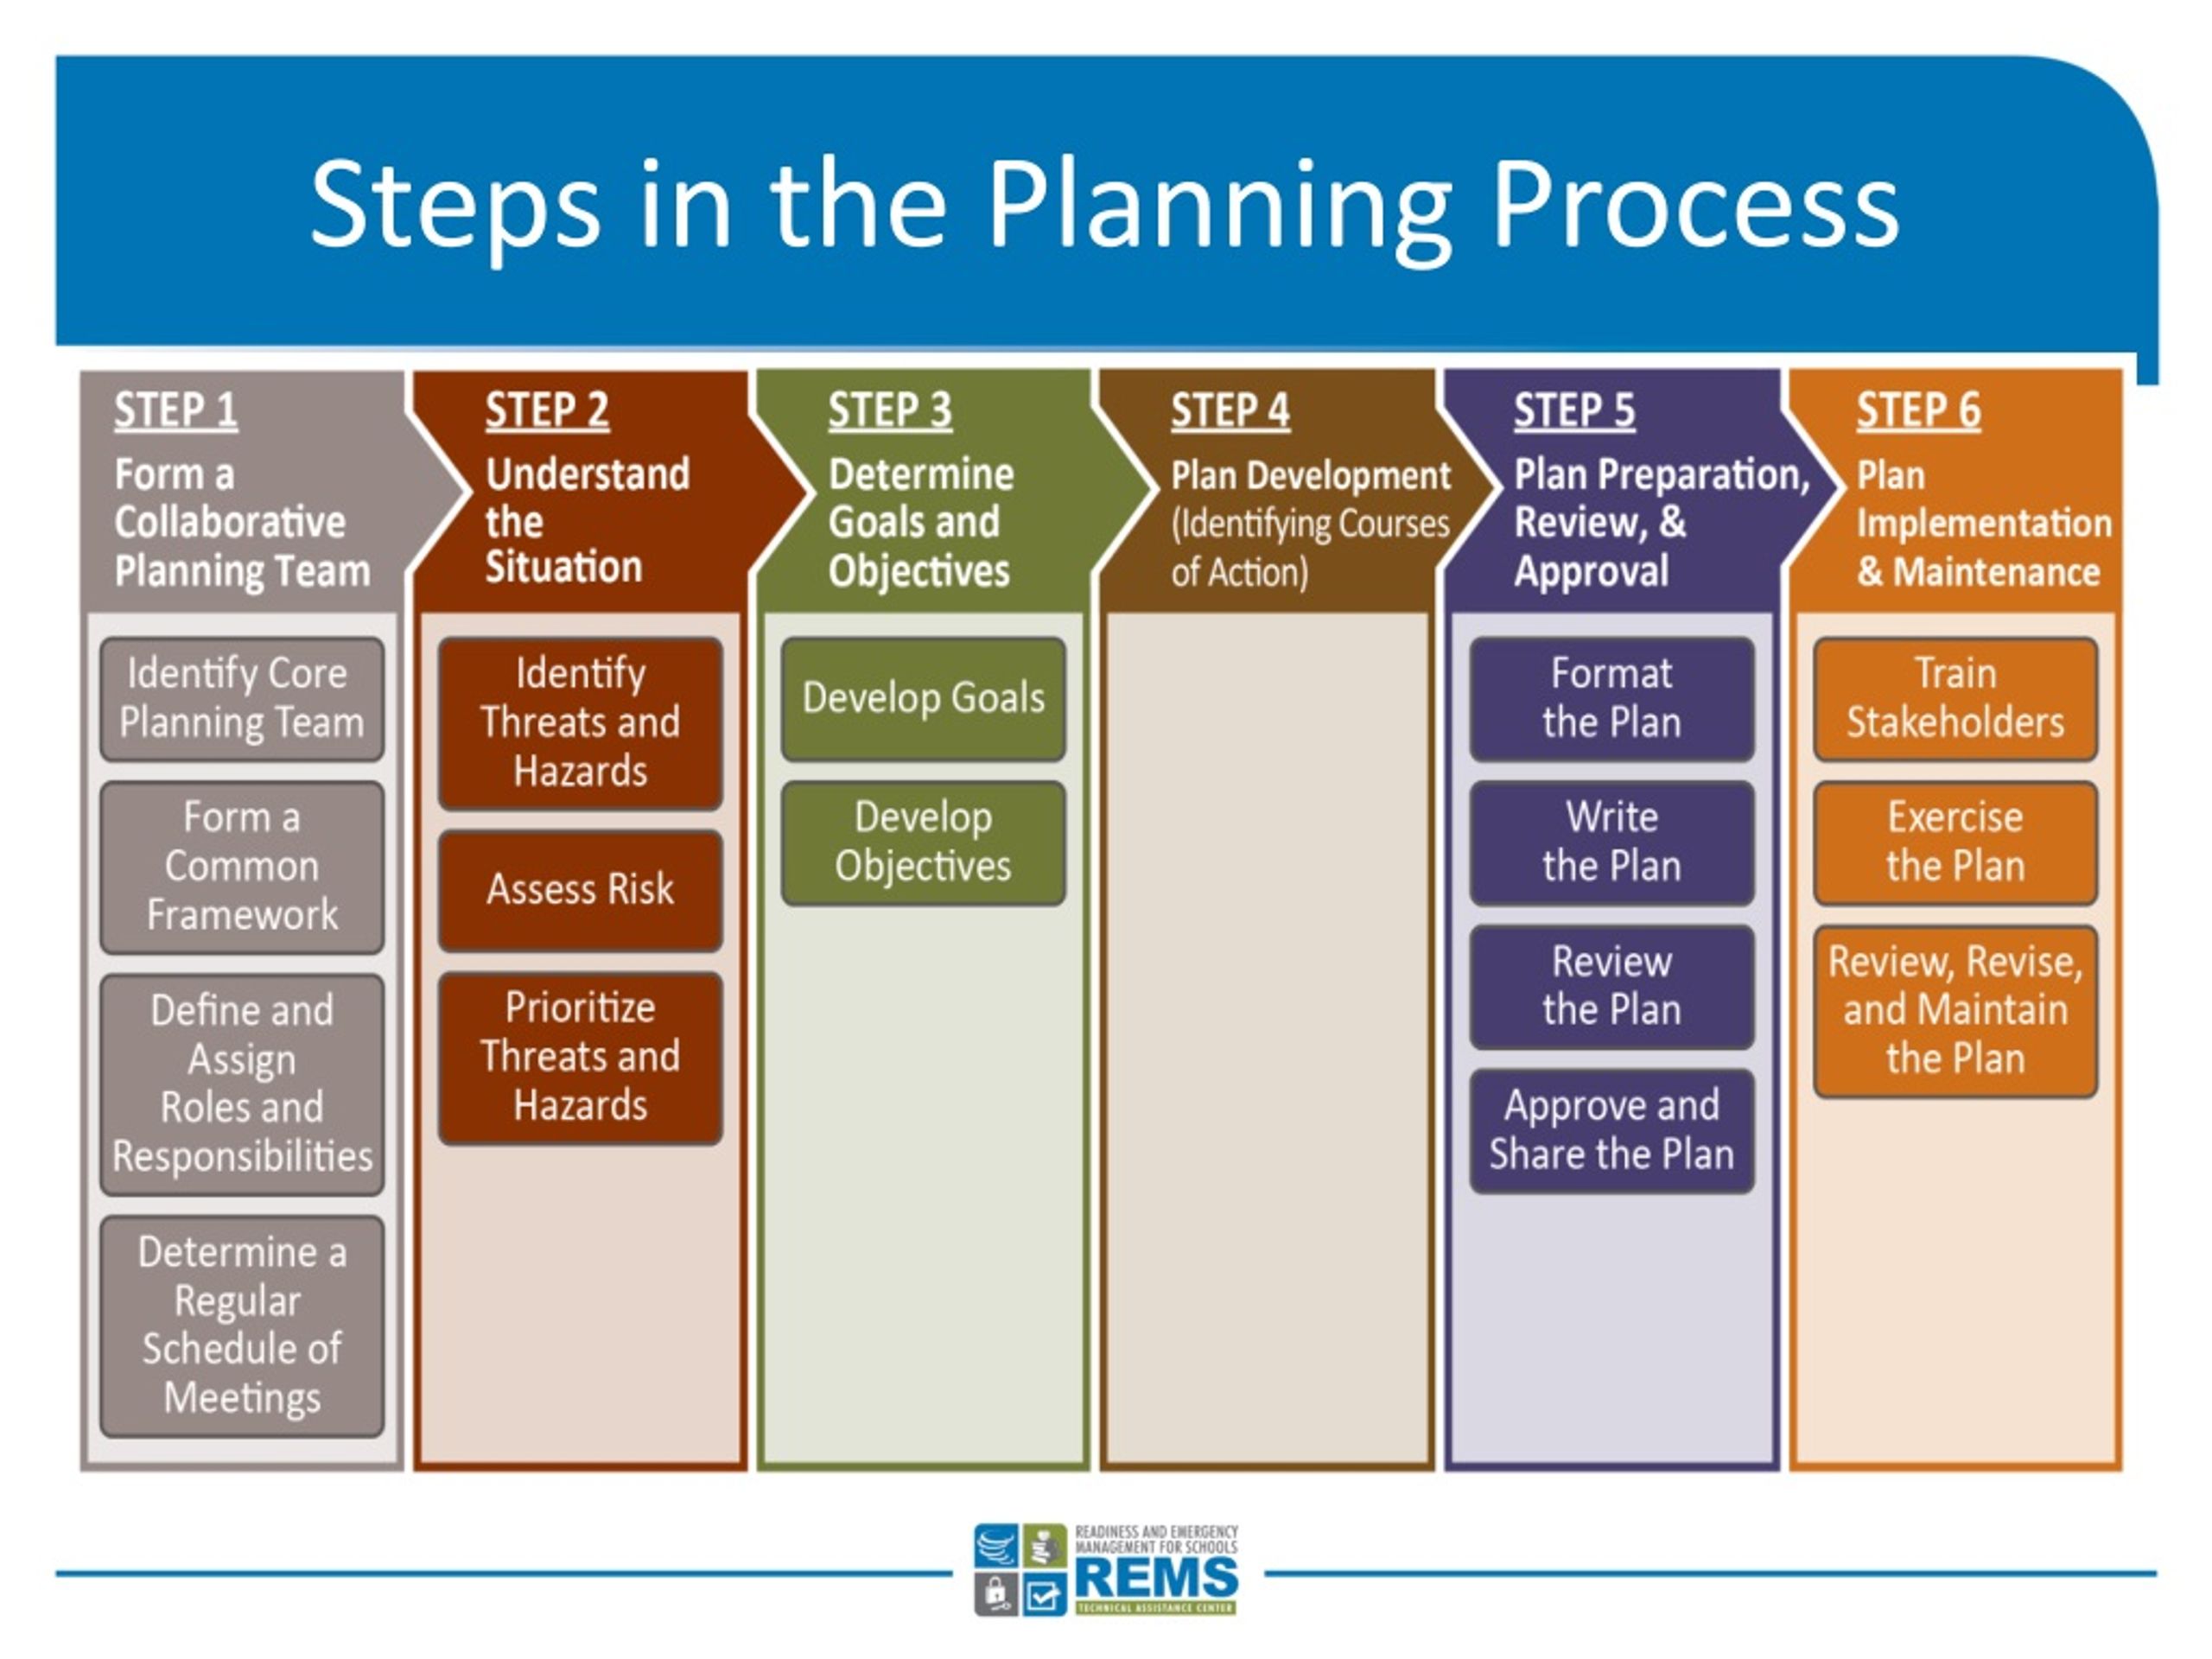 discuss steps involved in business planning process